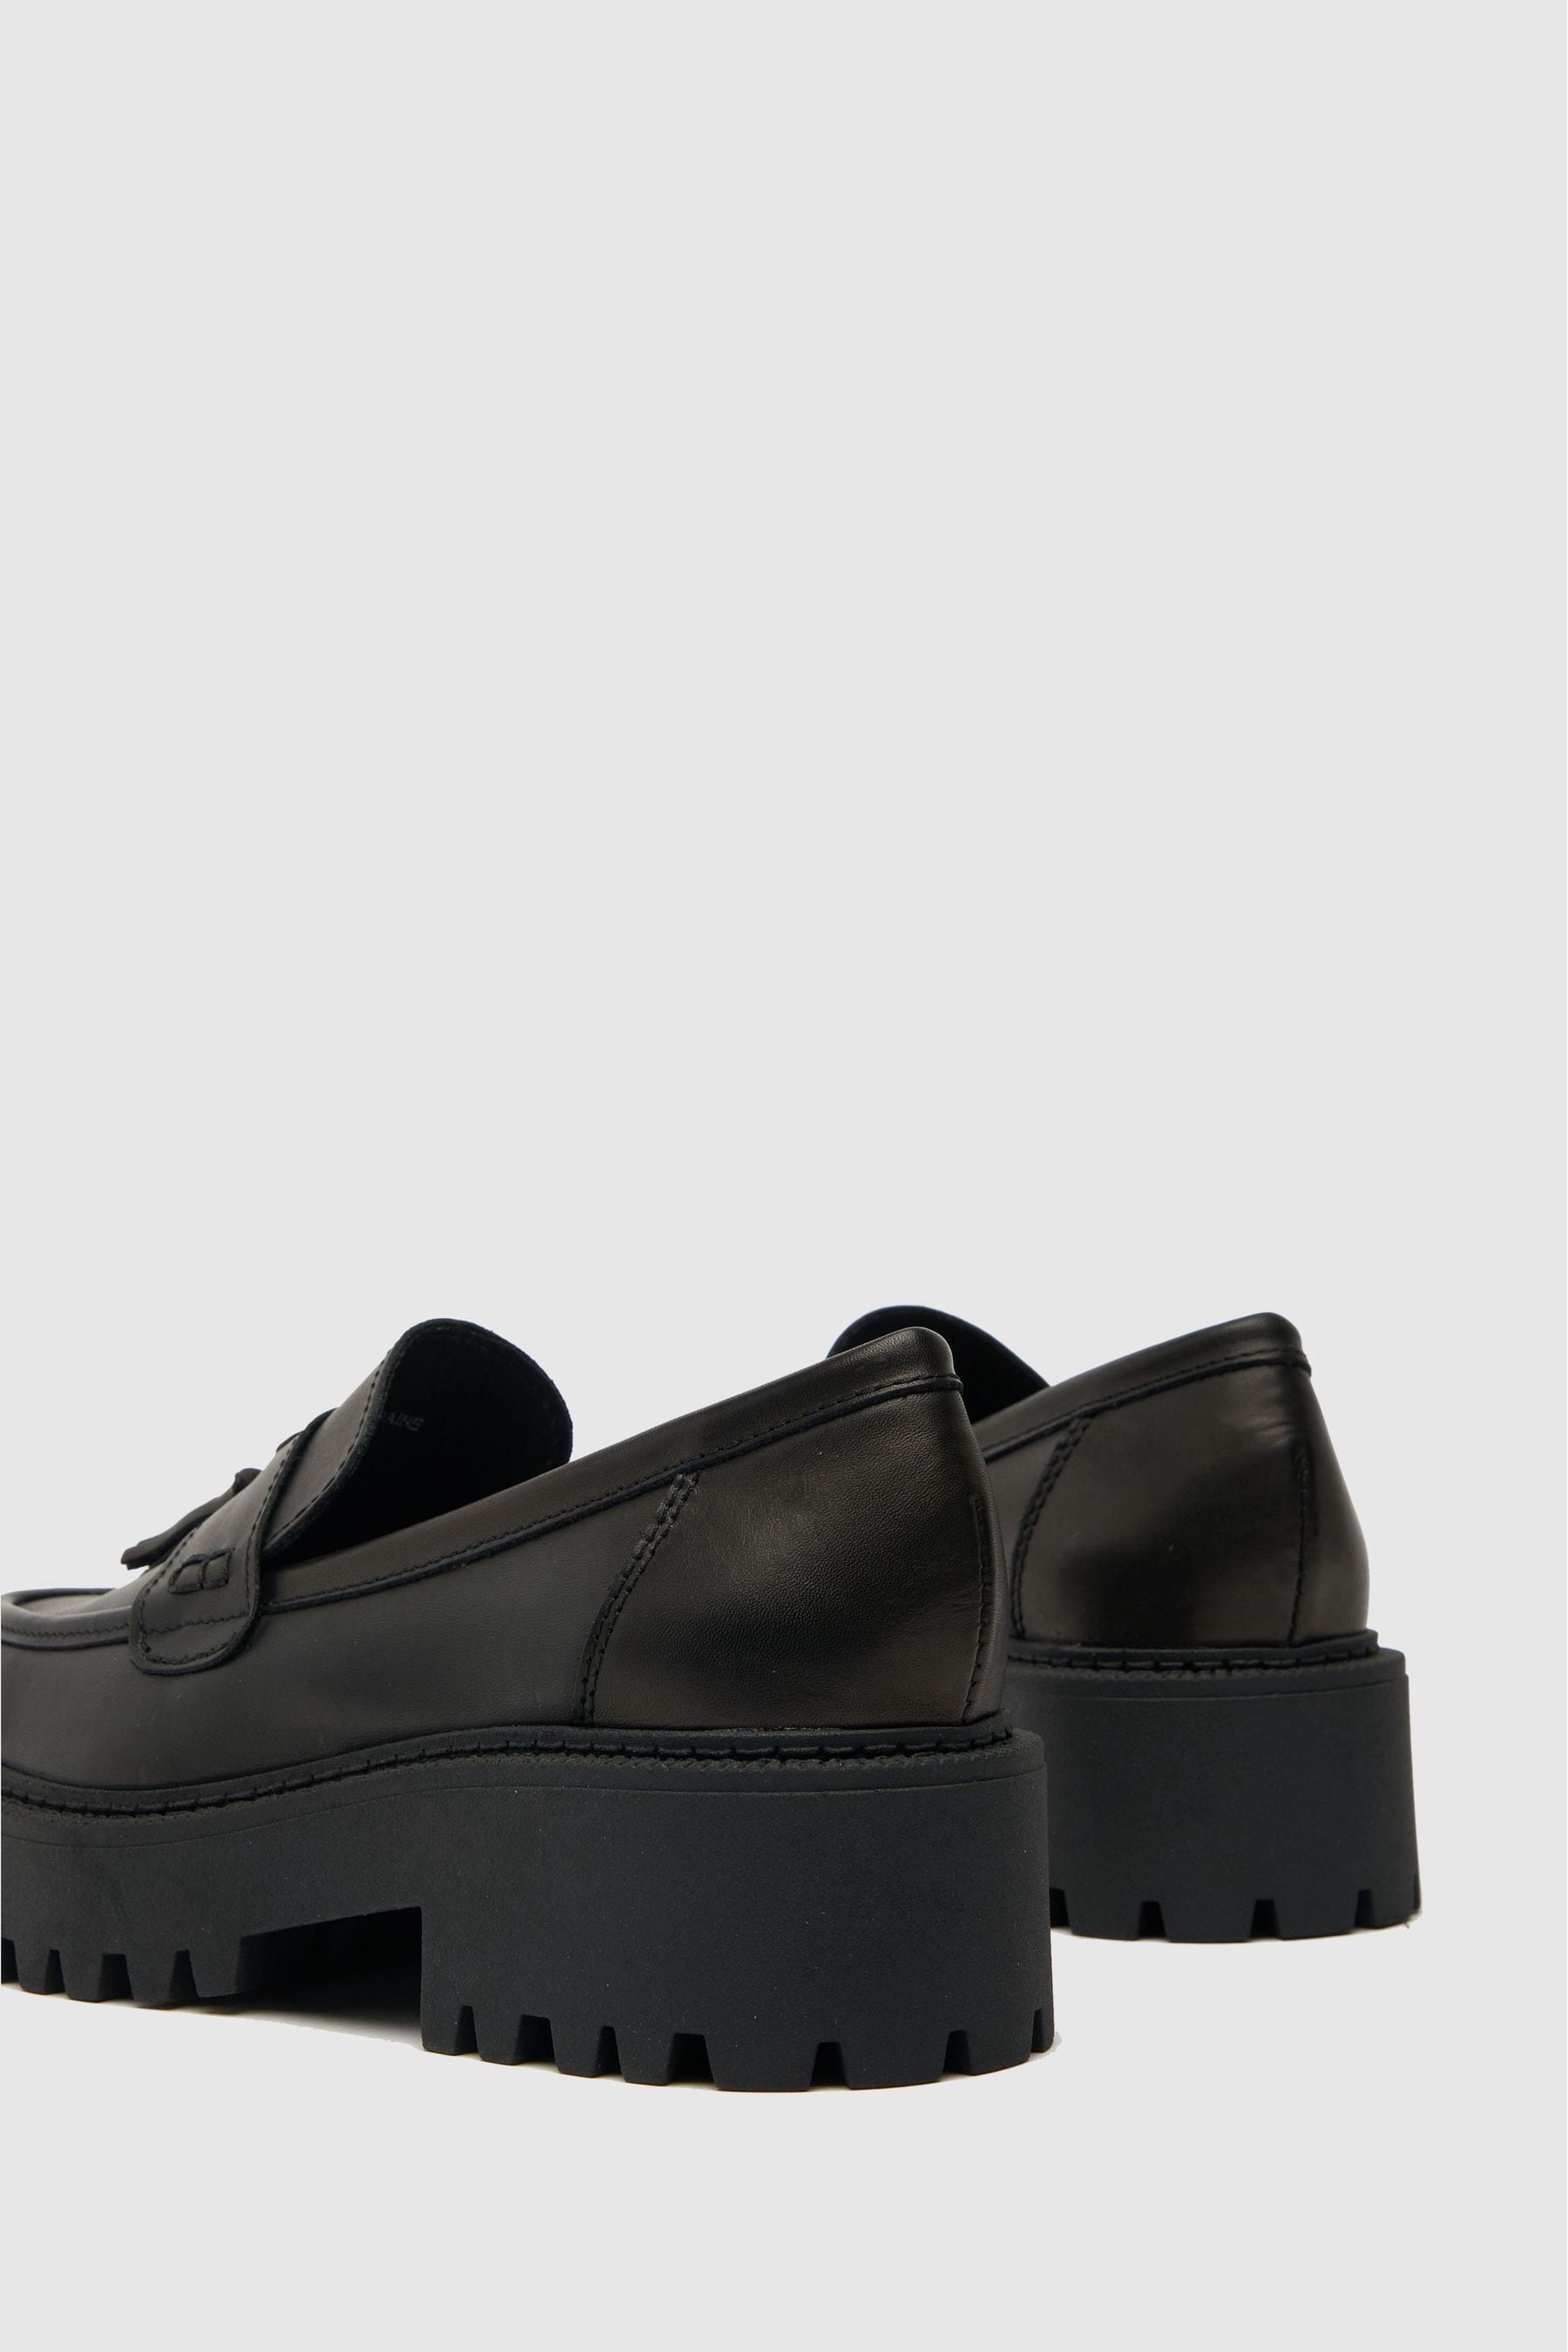 Buy Schuh Laura Tassel Leather Black Loafers from the Next UK online shop